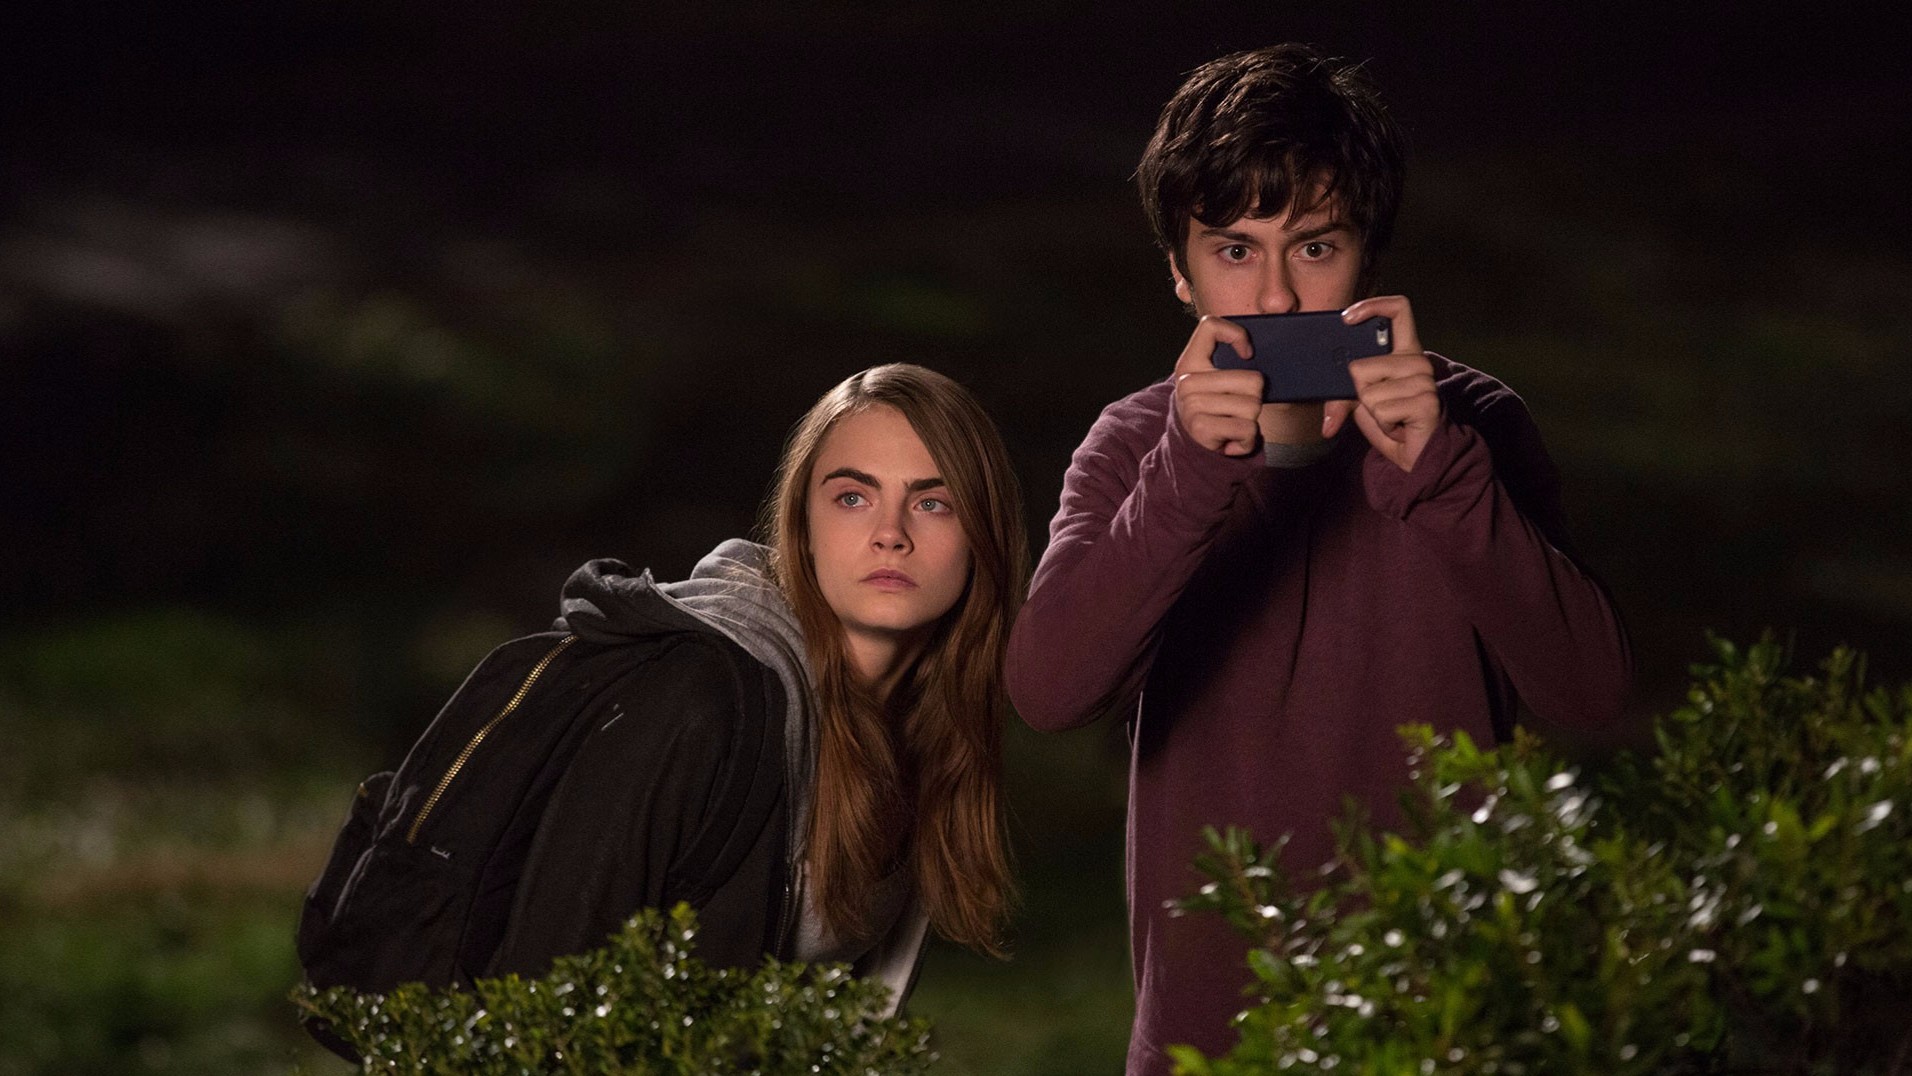 ‘PAPER TOWNS’ MEANS TO SUBVERT THE NOTION OF THE MANIC PIXIE DREAM GIRL, AND IT SUCCEEDS